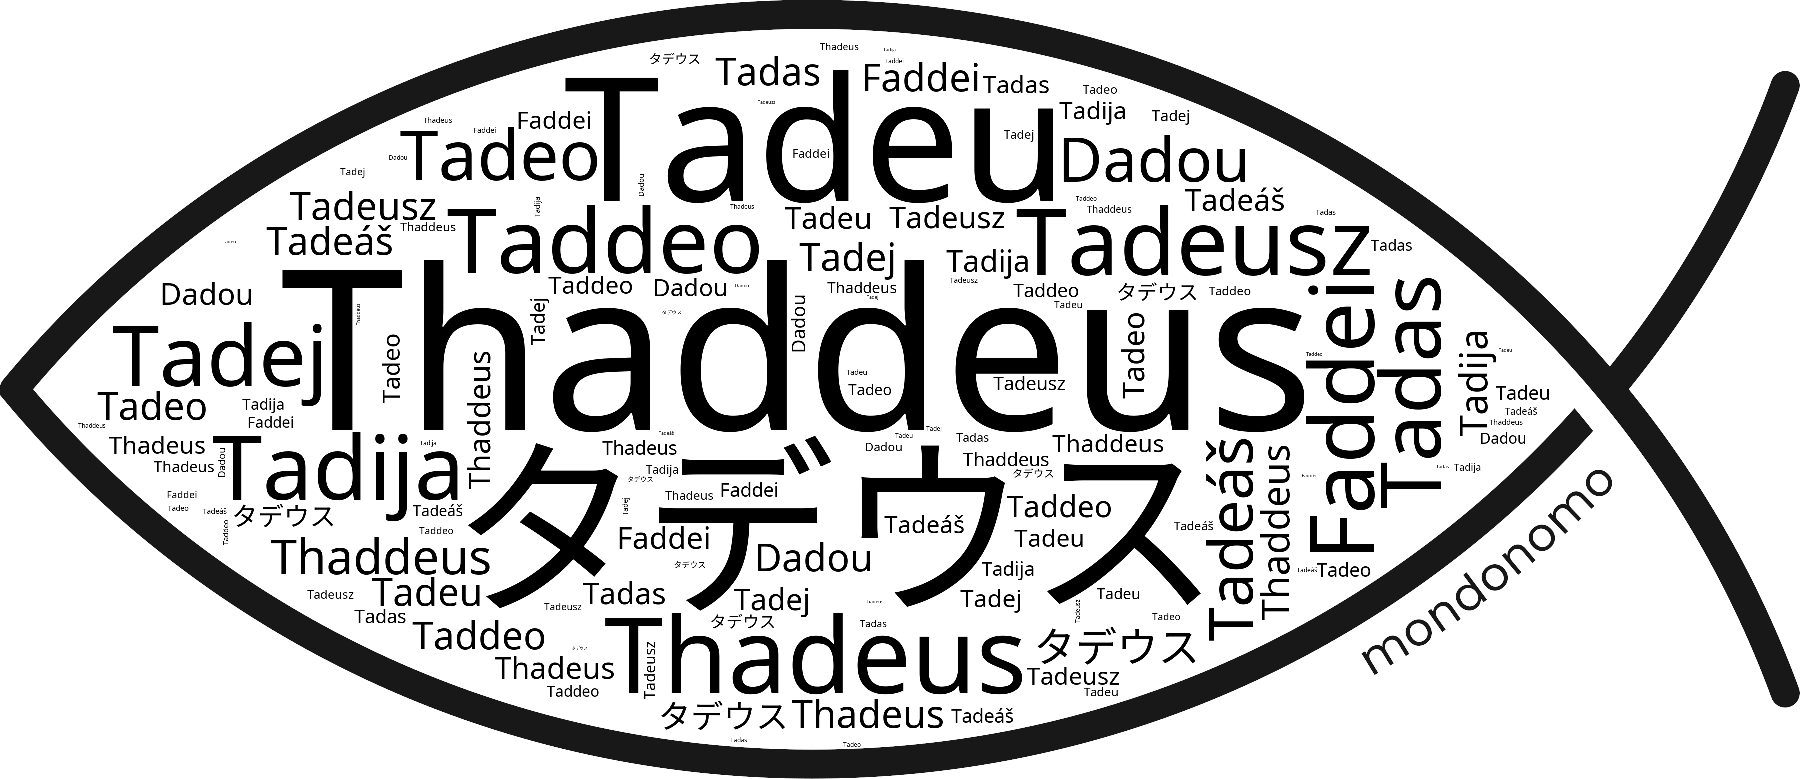 Name Thaddeus in the world's Bibles